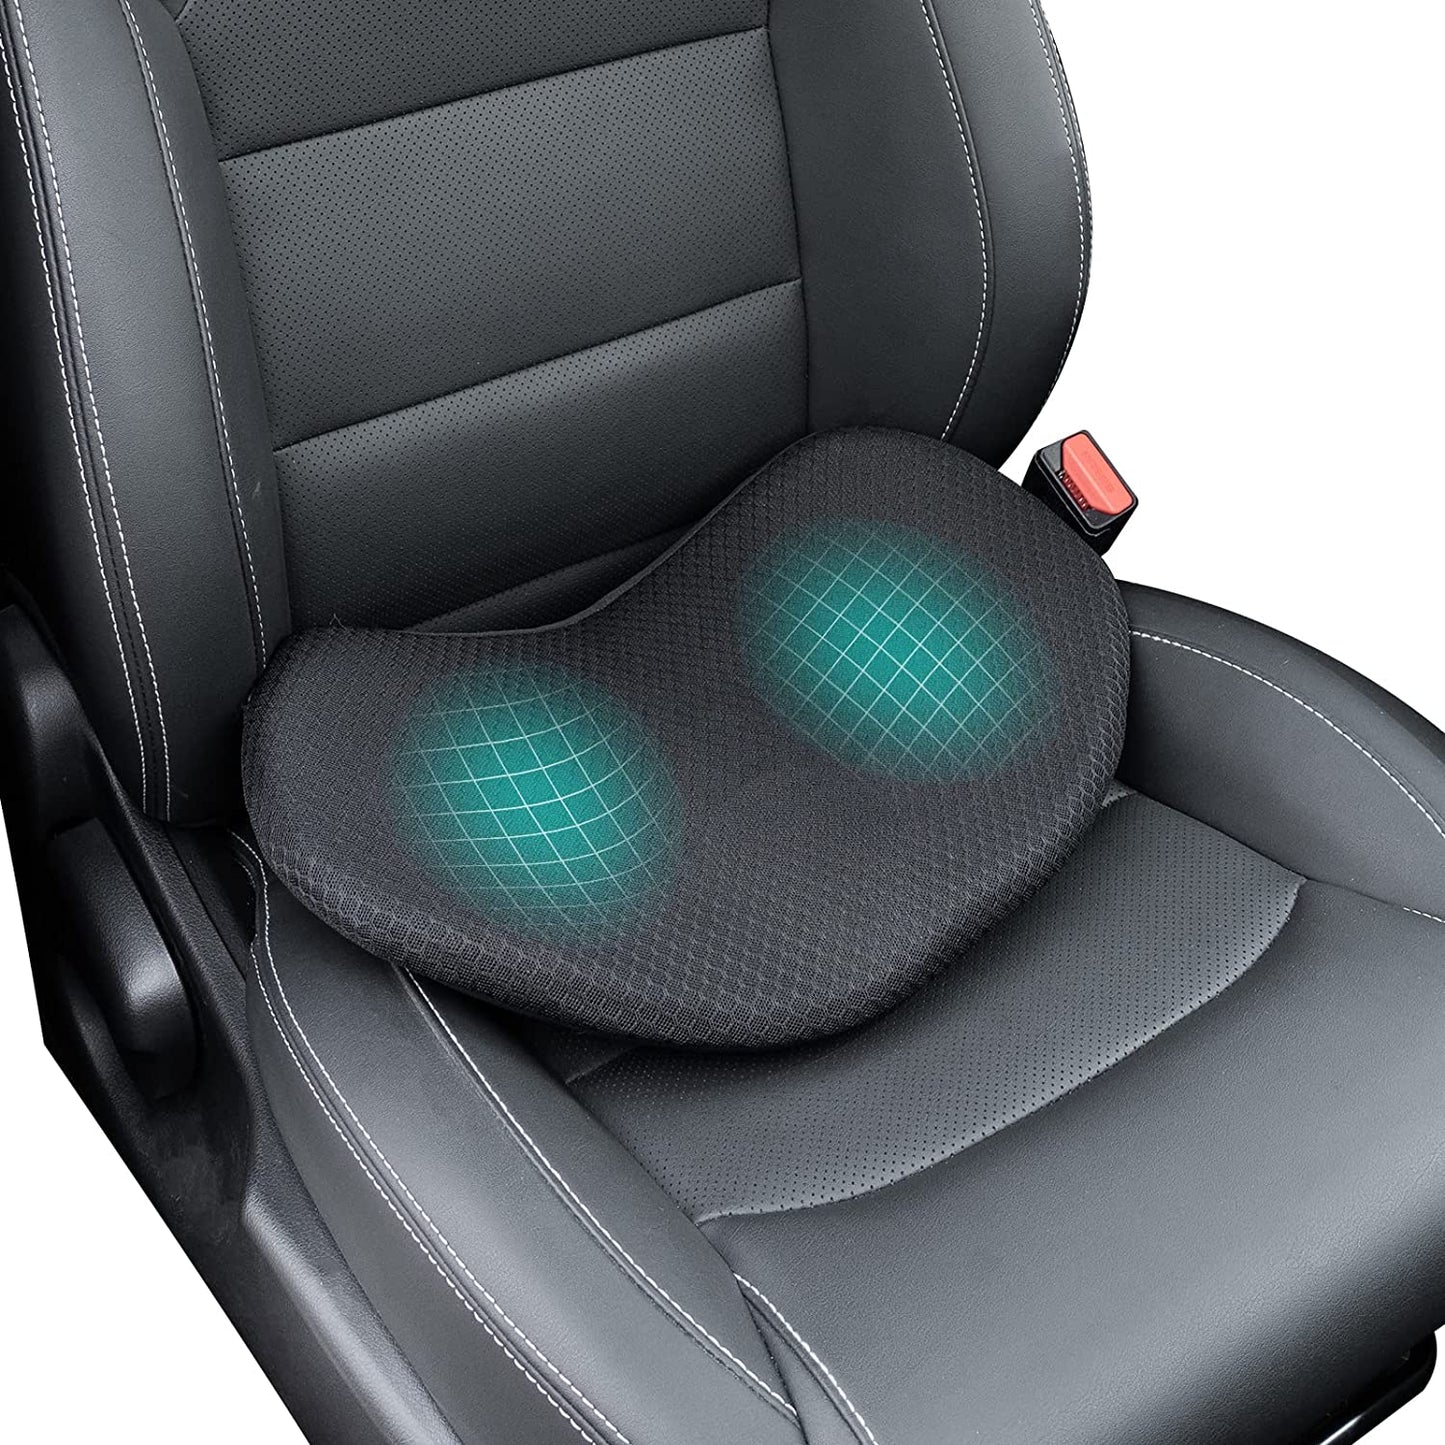 Driving Cushion For Short Drivers